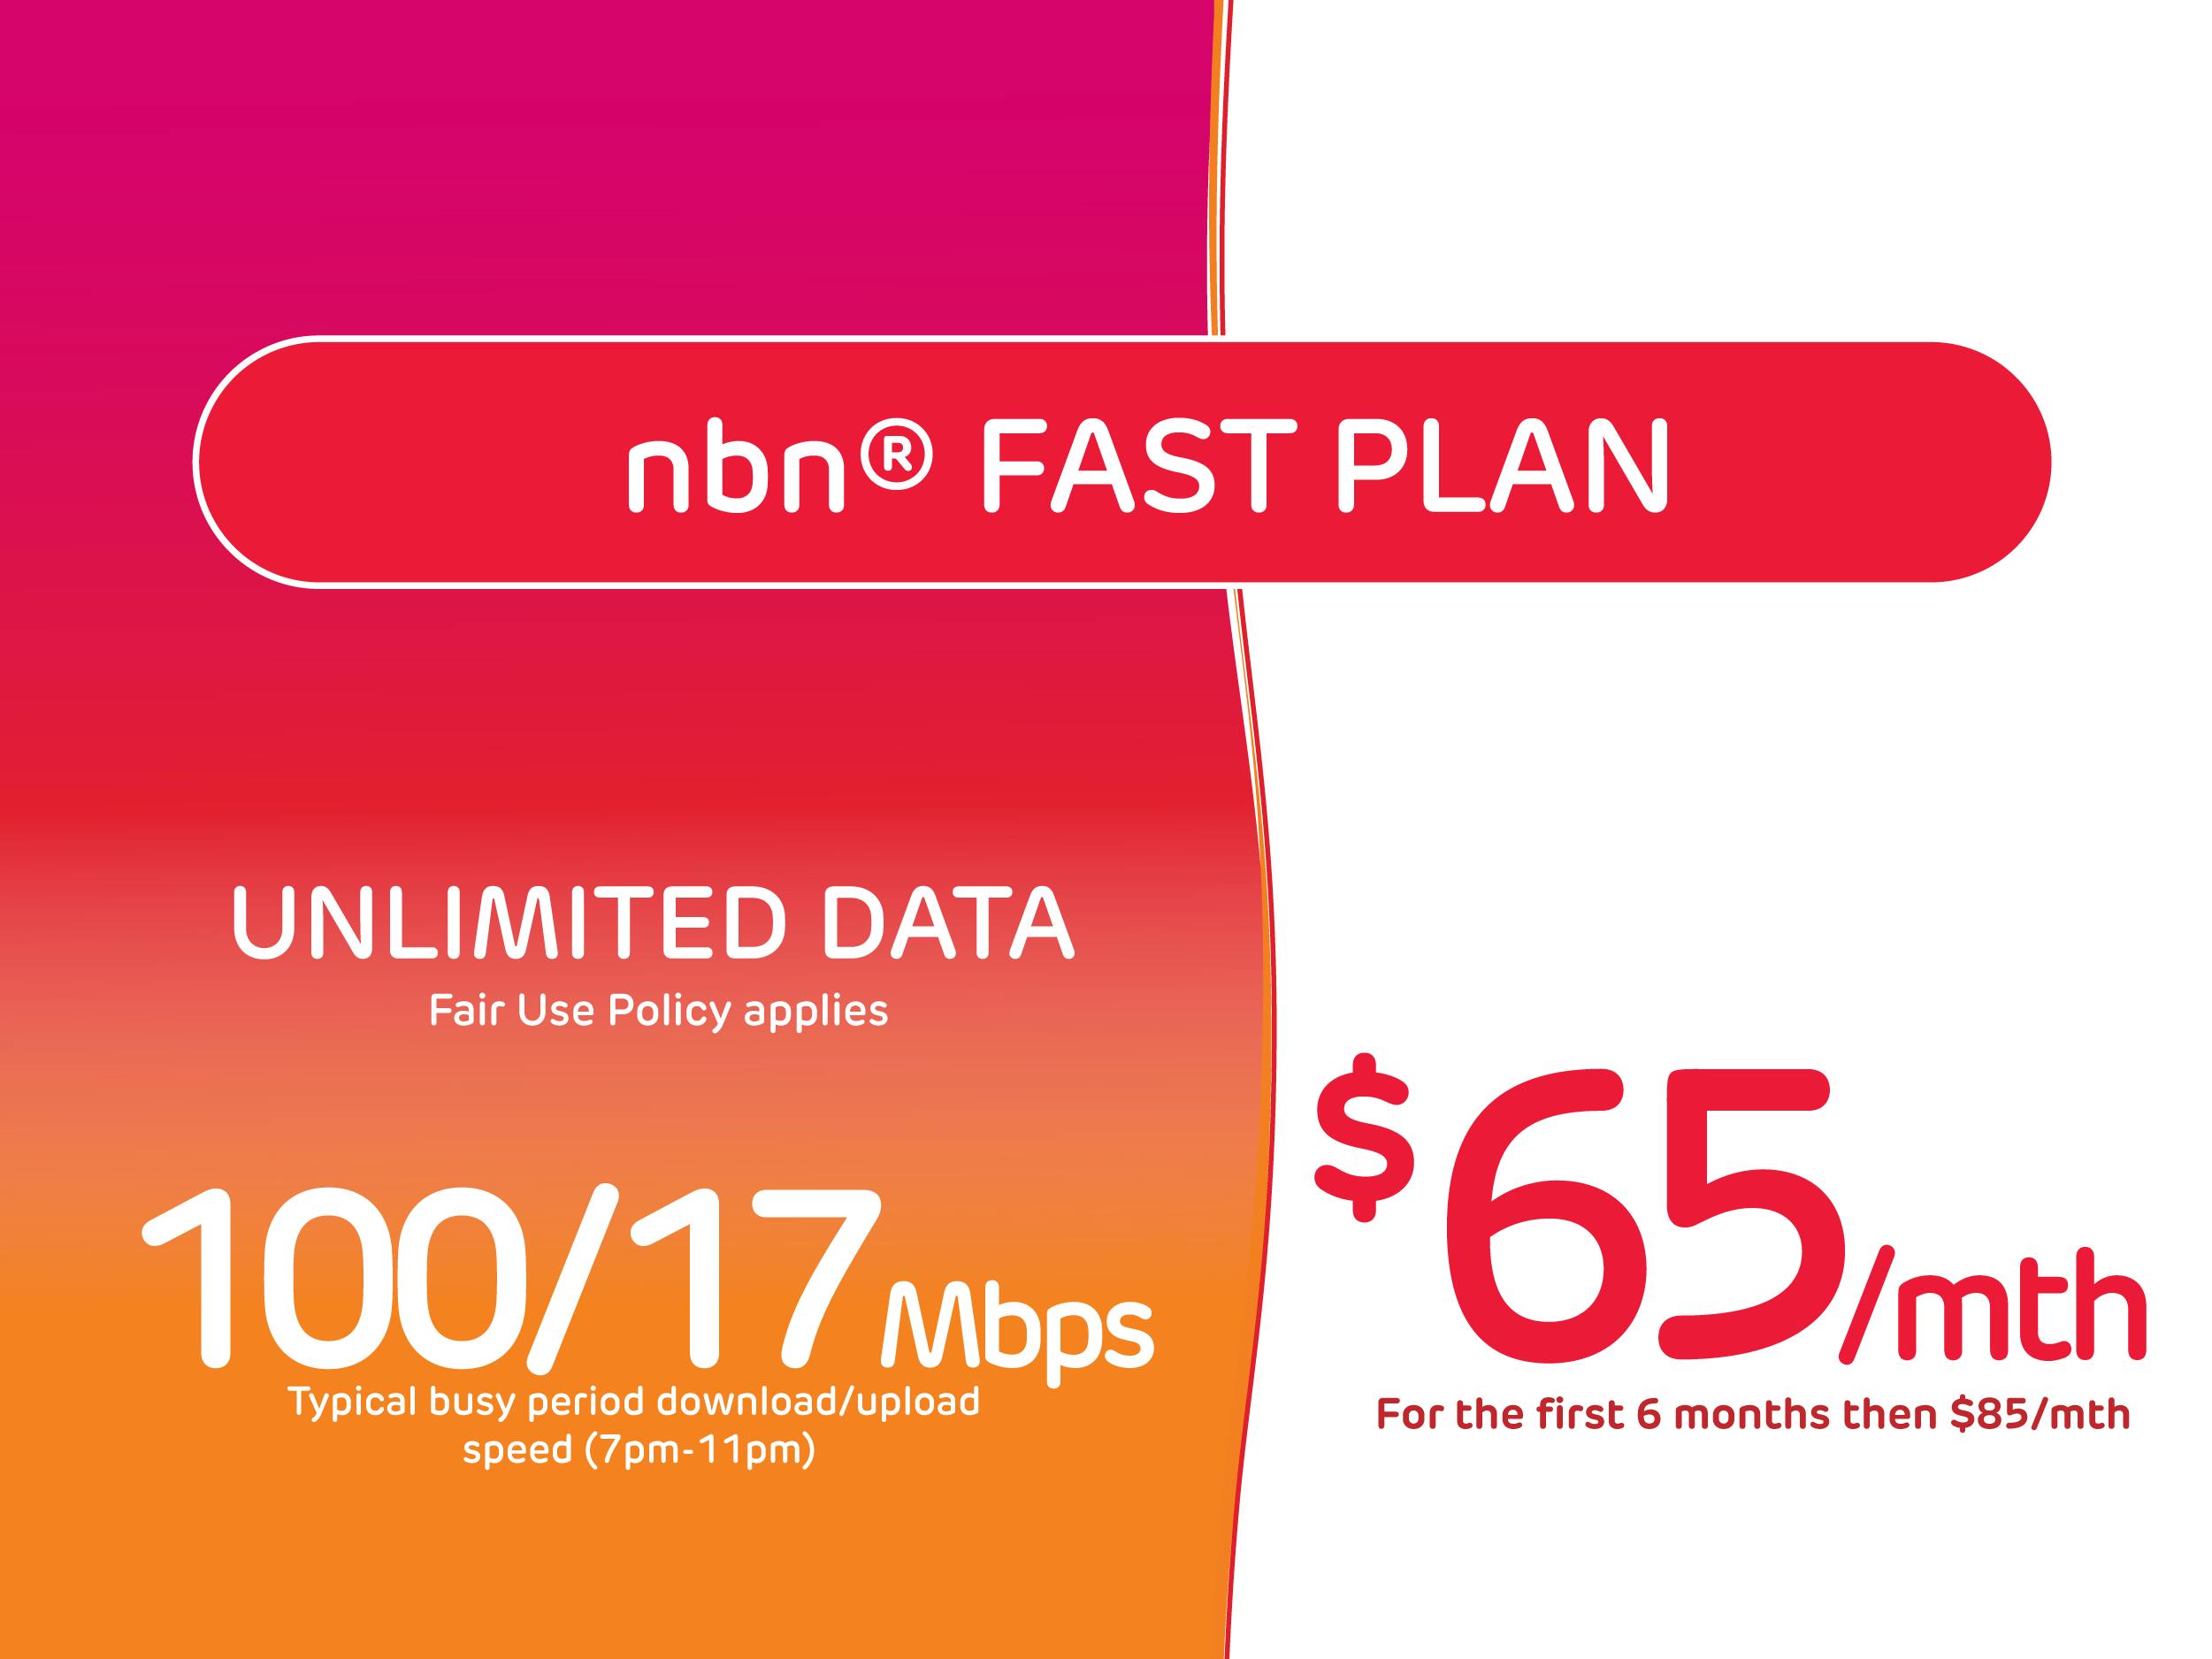 Promotional advertisement for the nbn Fast Plan offering unlimited data at speeds of 100/17 Mbps during typical busy periods (7pm-11pm). The plan costs $65 per month for the first six months, then increases to $85 per month. The background blends from pink to orange, emphasising the plan's details clearly with large, bold text.